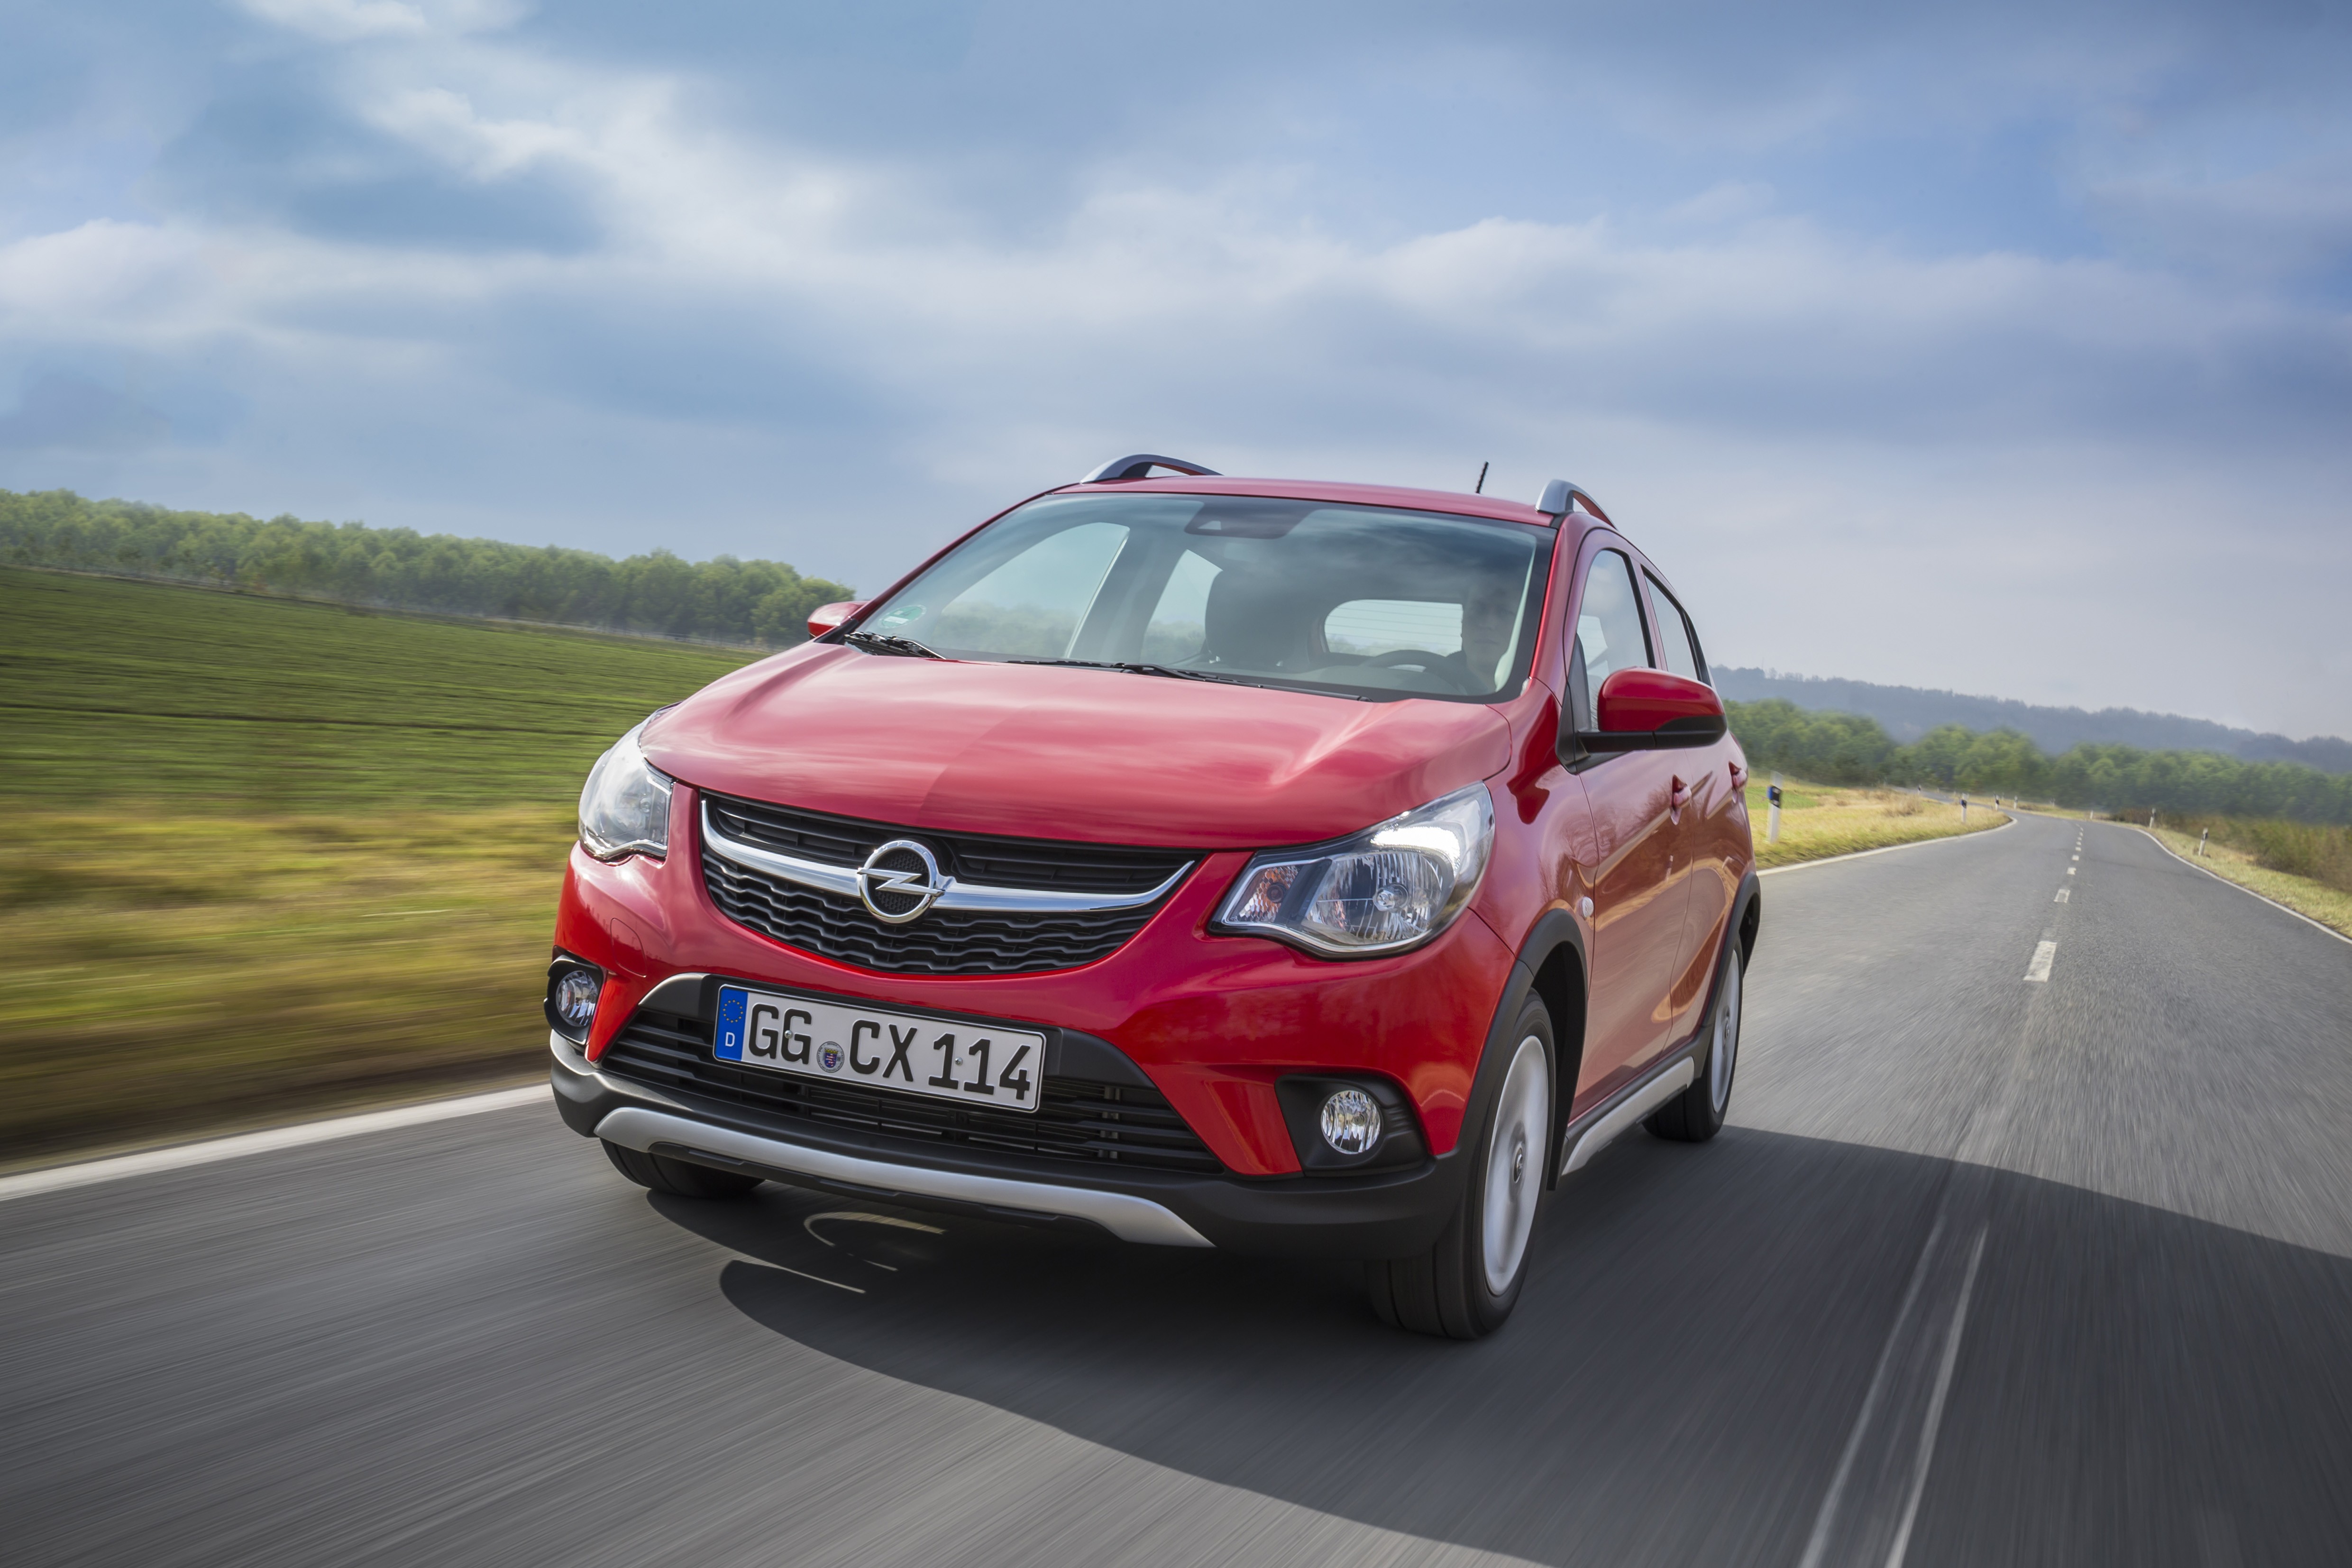 2017 Opel Karl Rocks Looks Like a Car Nobody Asked For - autoevolution